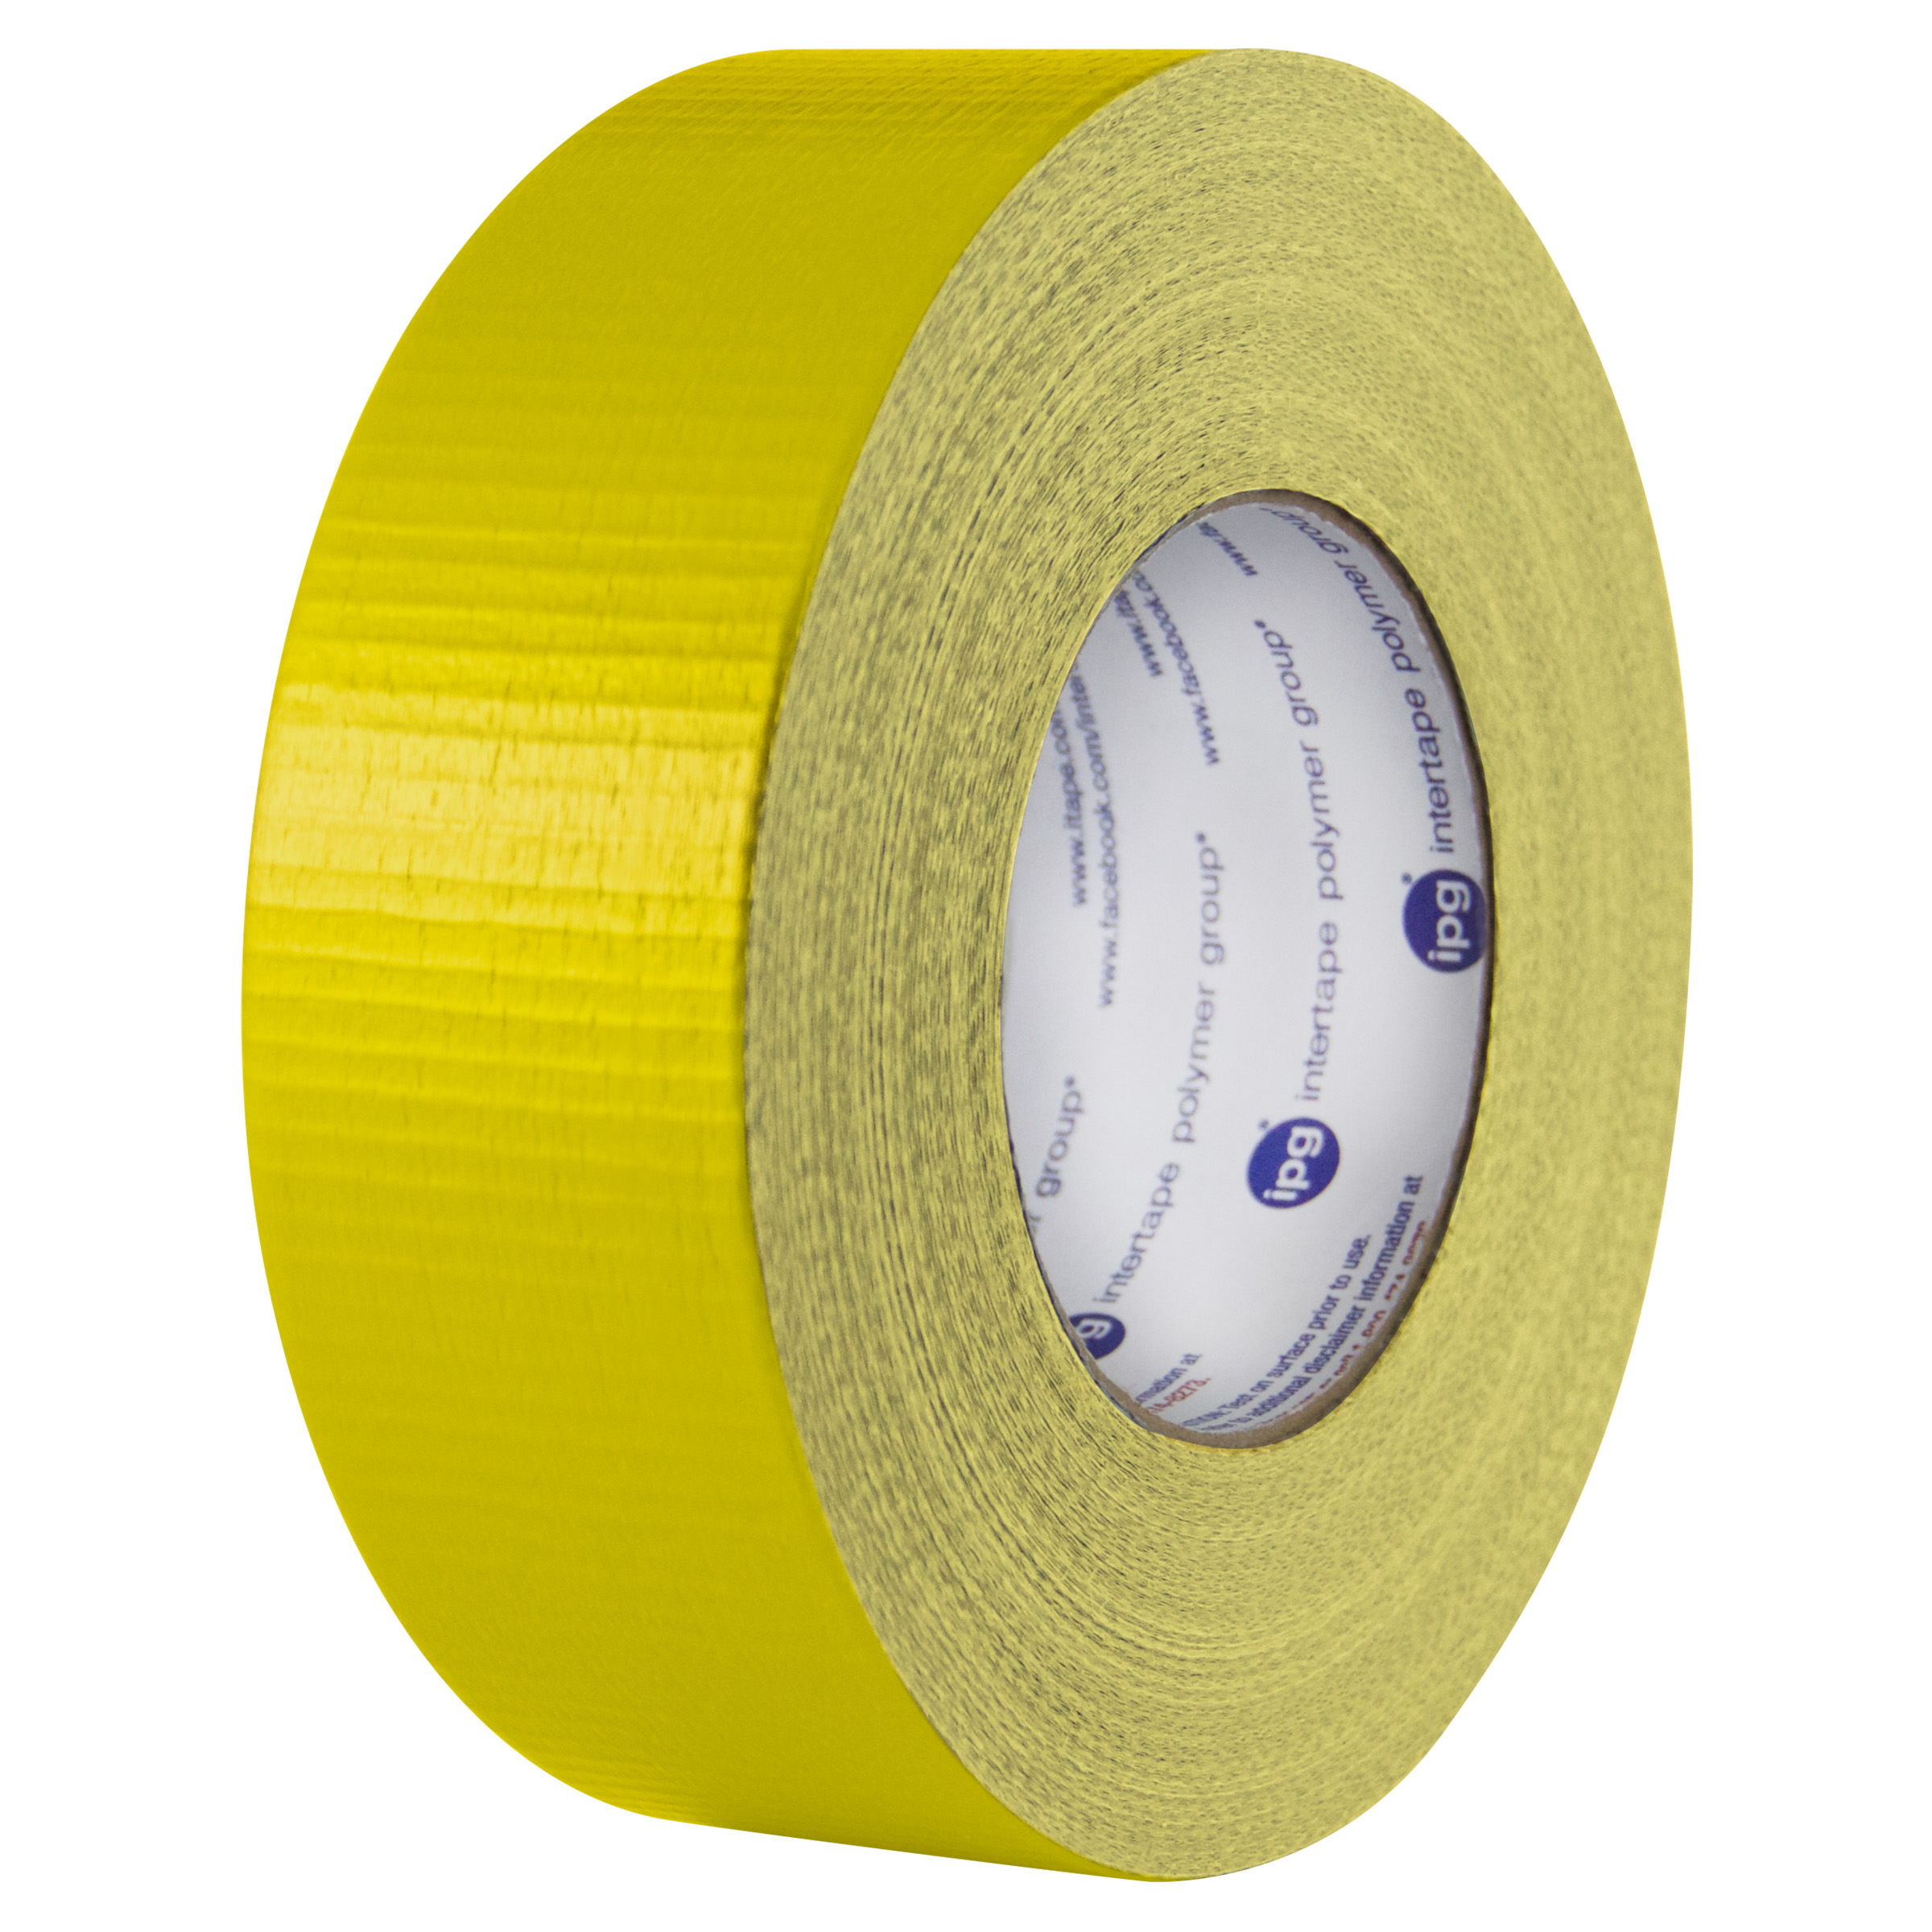 COLOR-CHANGING ORANGE-YELLOW DUCT TAPE